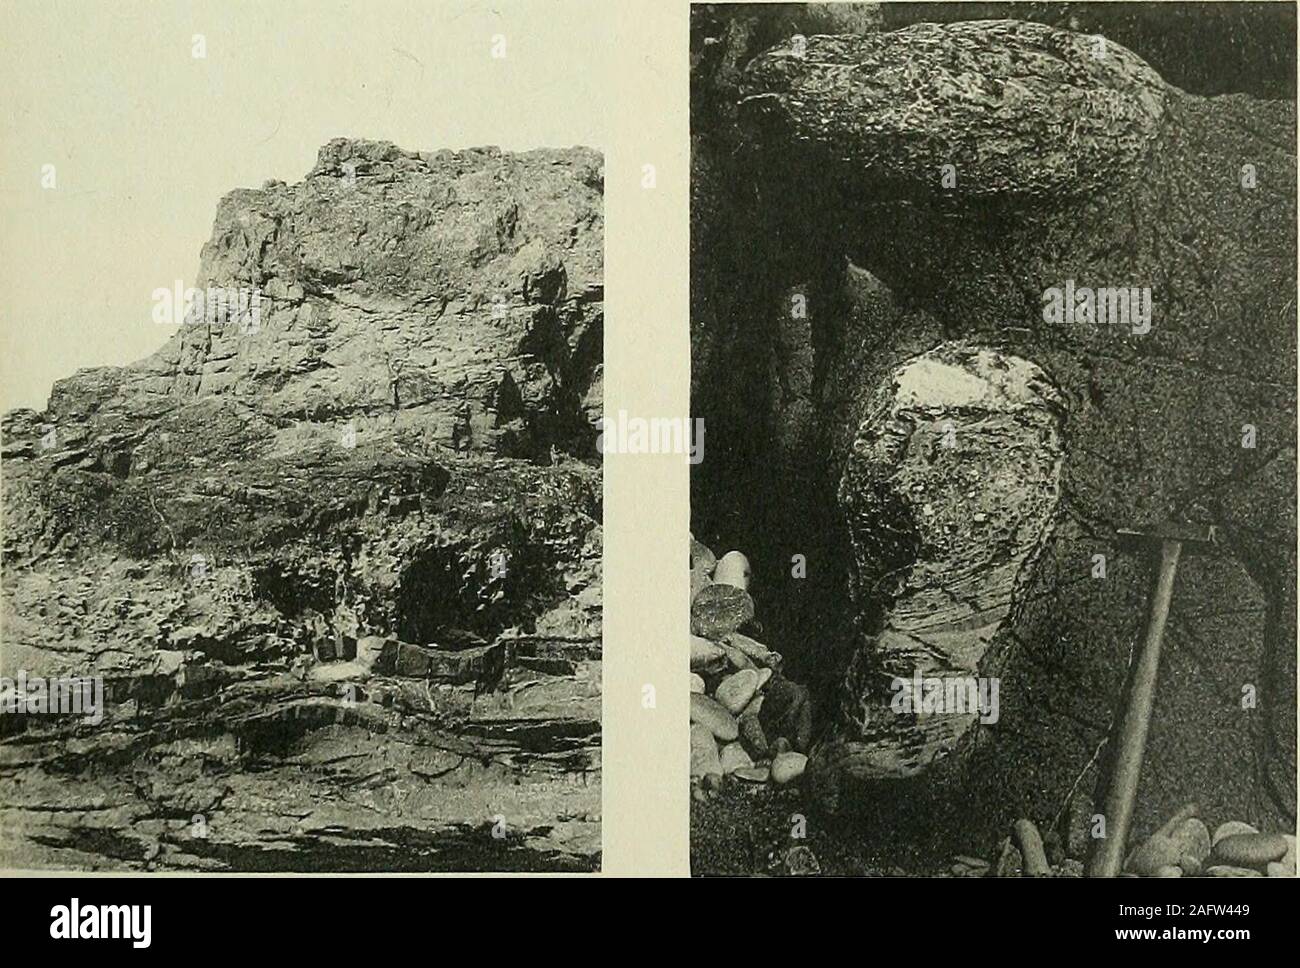 . The Quarterly journal of the Geological Society of London. A J. PhatO. Bemrose.CoUo Derby LAVAS AND SANDSTONES OF THE FORFARSHIRE COAST. , Quart. Journ. Geol. Soc. Vol. LXIX, Pl.XLVI. 1. x 20 Stock Photo